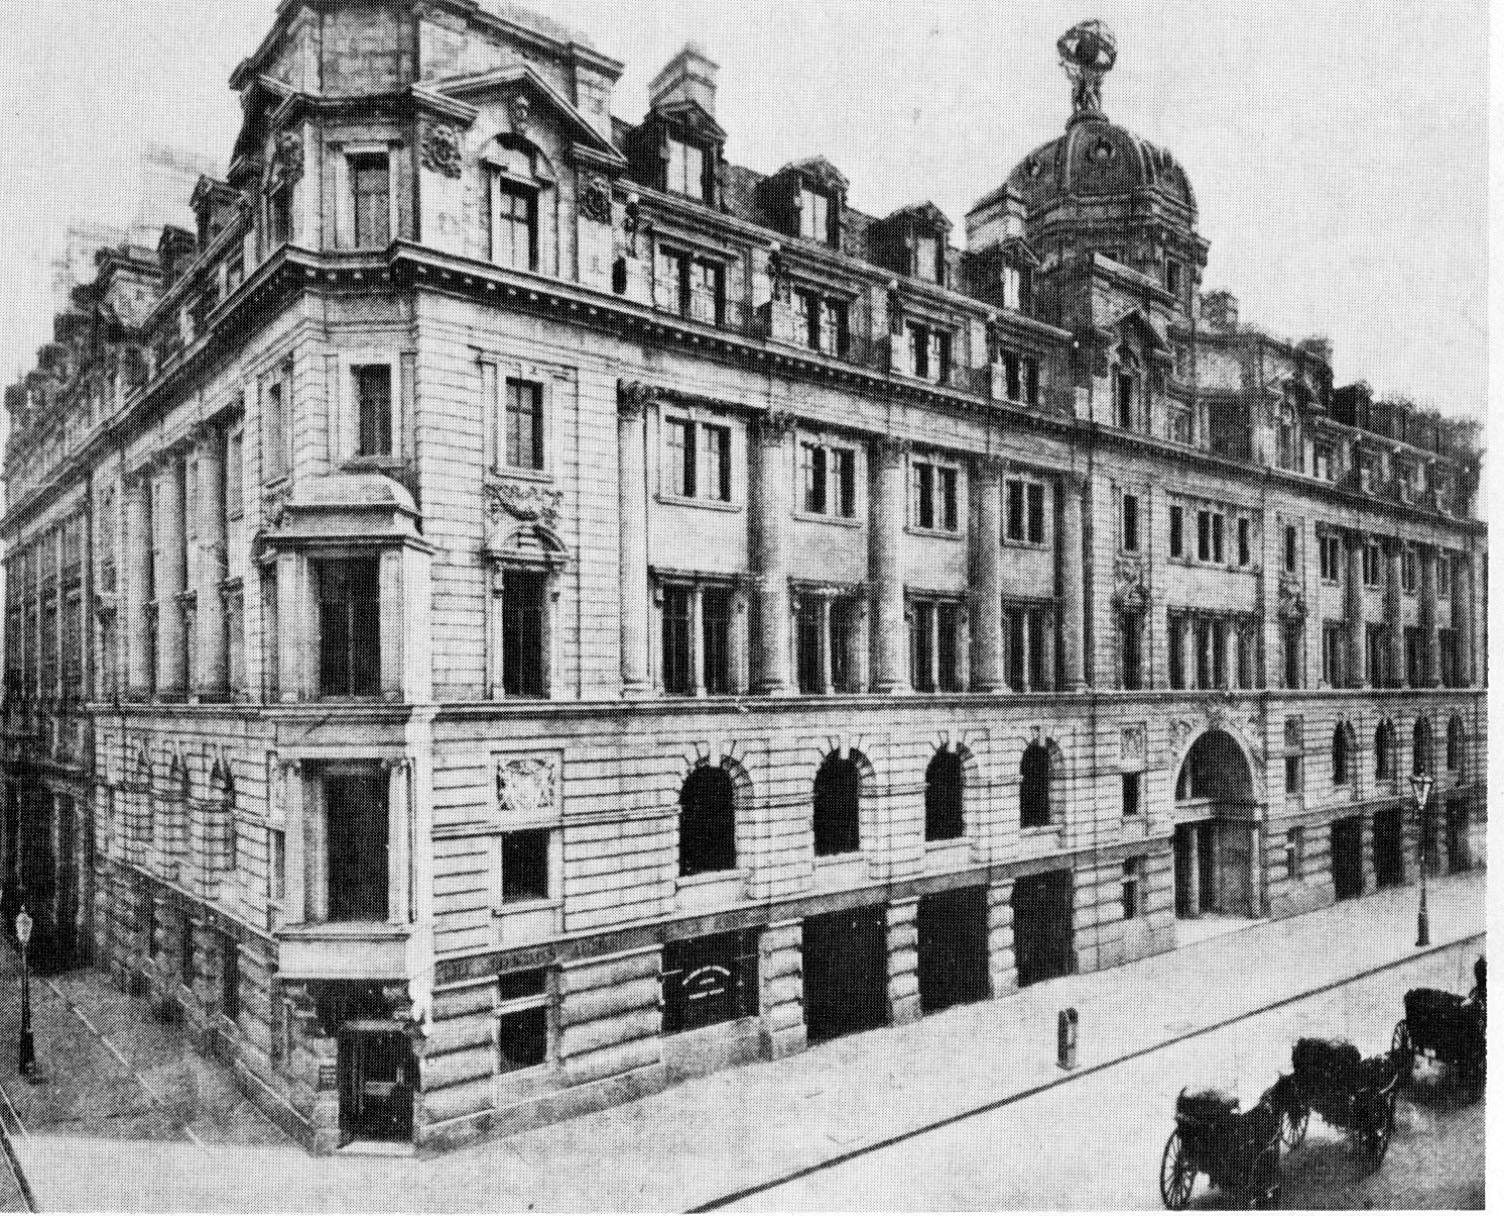 Electra House Moorgate, headquarters of the Eastern Telegraph Co. in 1902